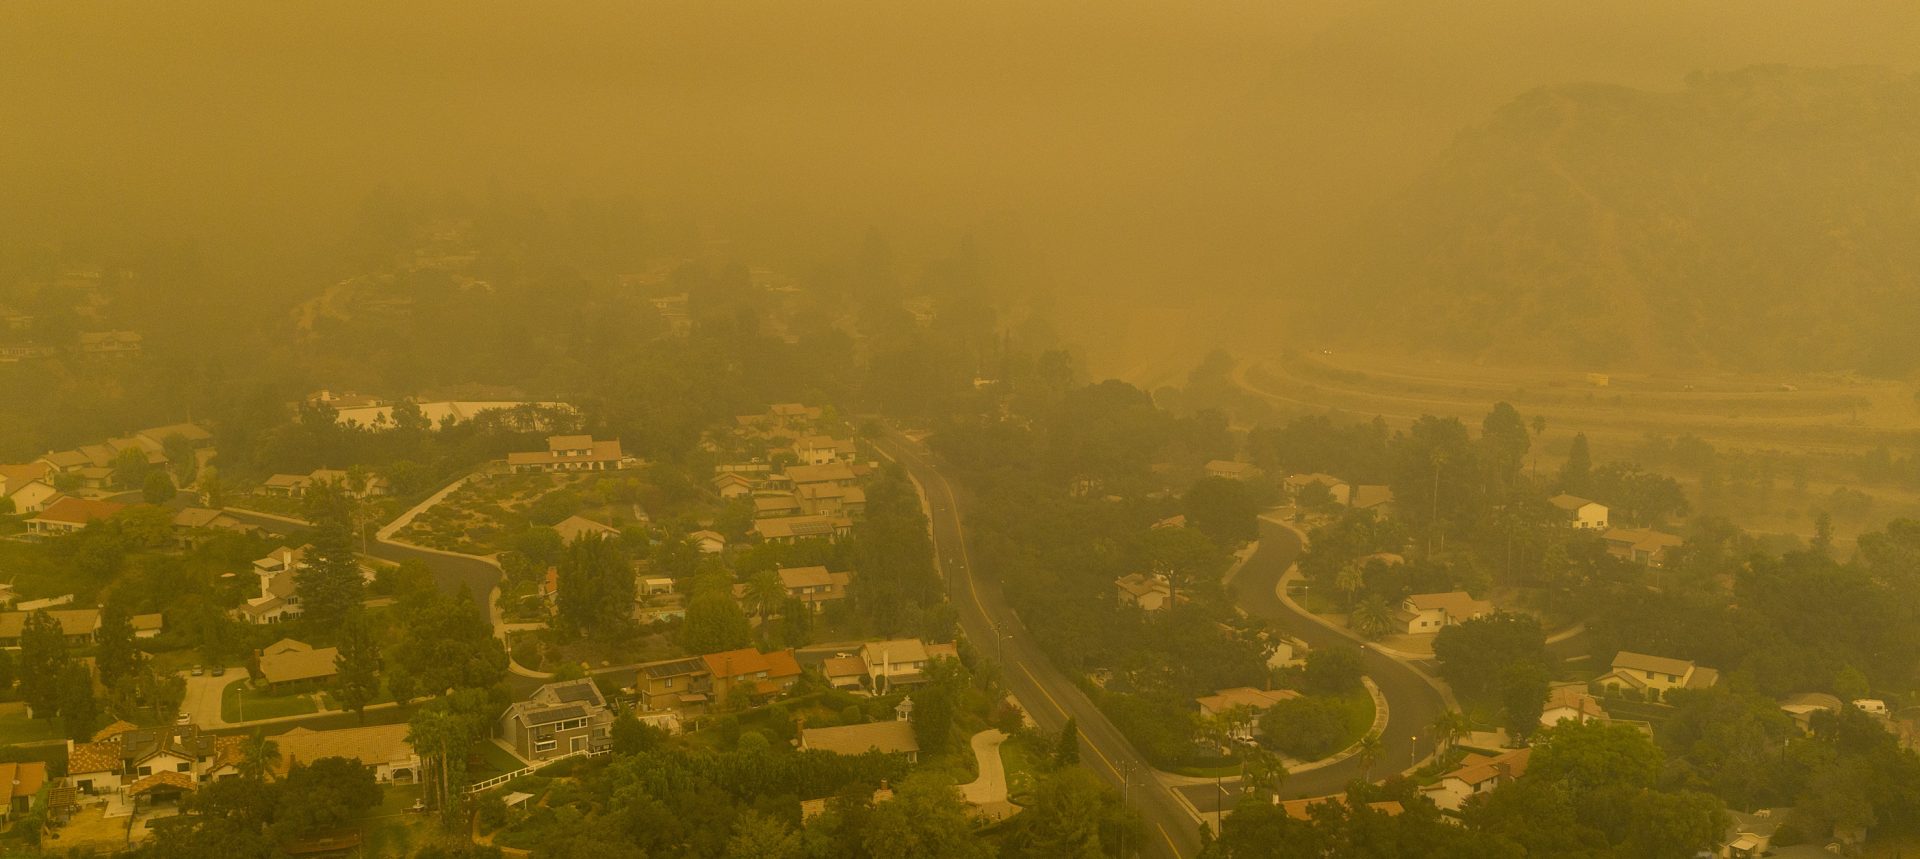 Climate change has been a key factor in increasing the risk and extent of wildfires and other catastrophic weather events. An aerial view shows neighborhoods shrouded in smoke from the Bobcat Fire in California in September.